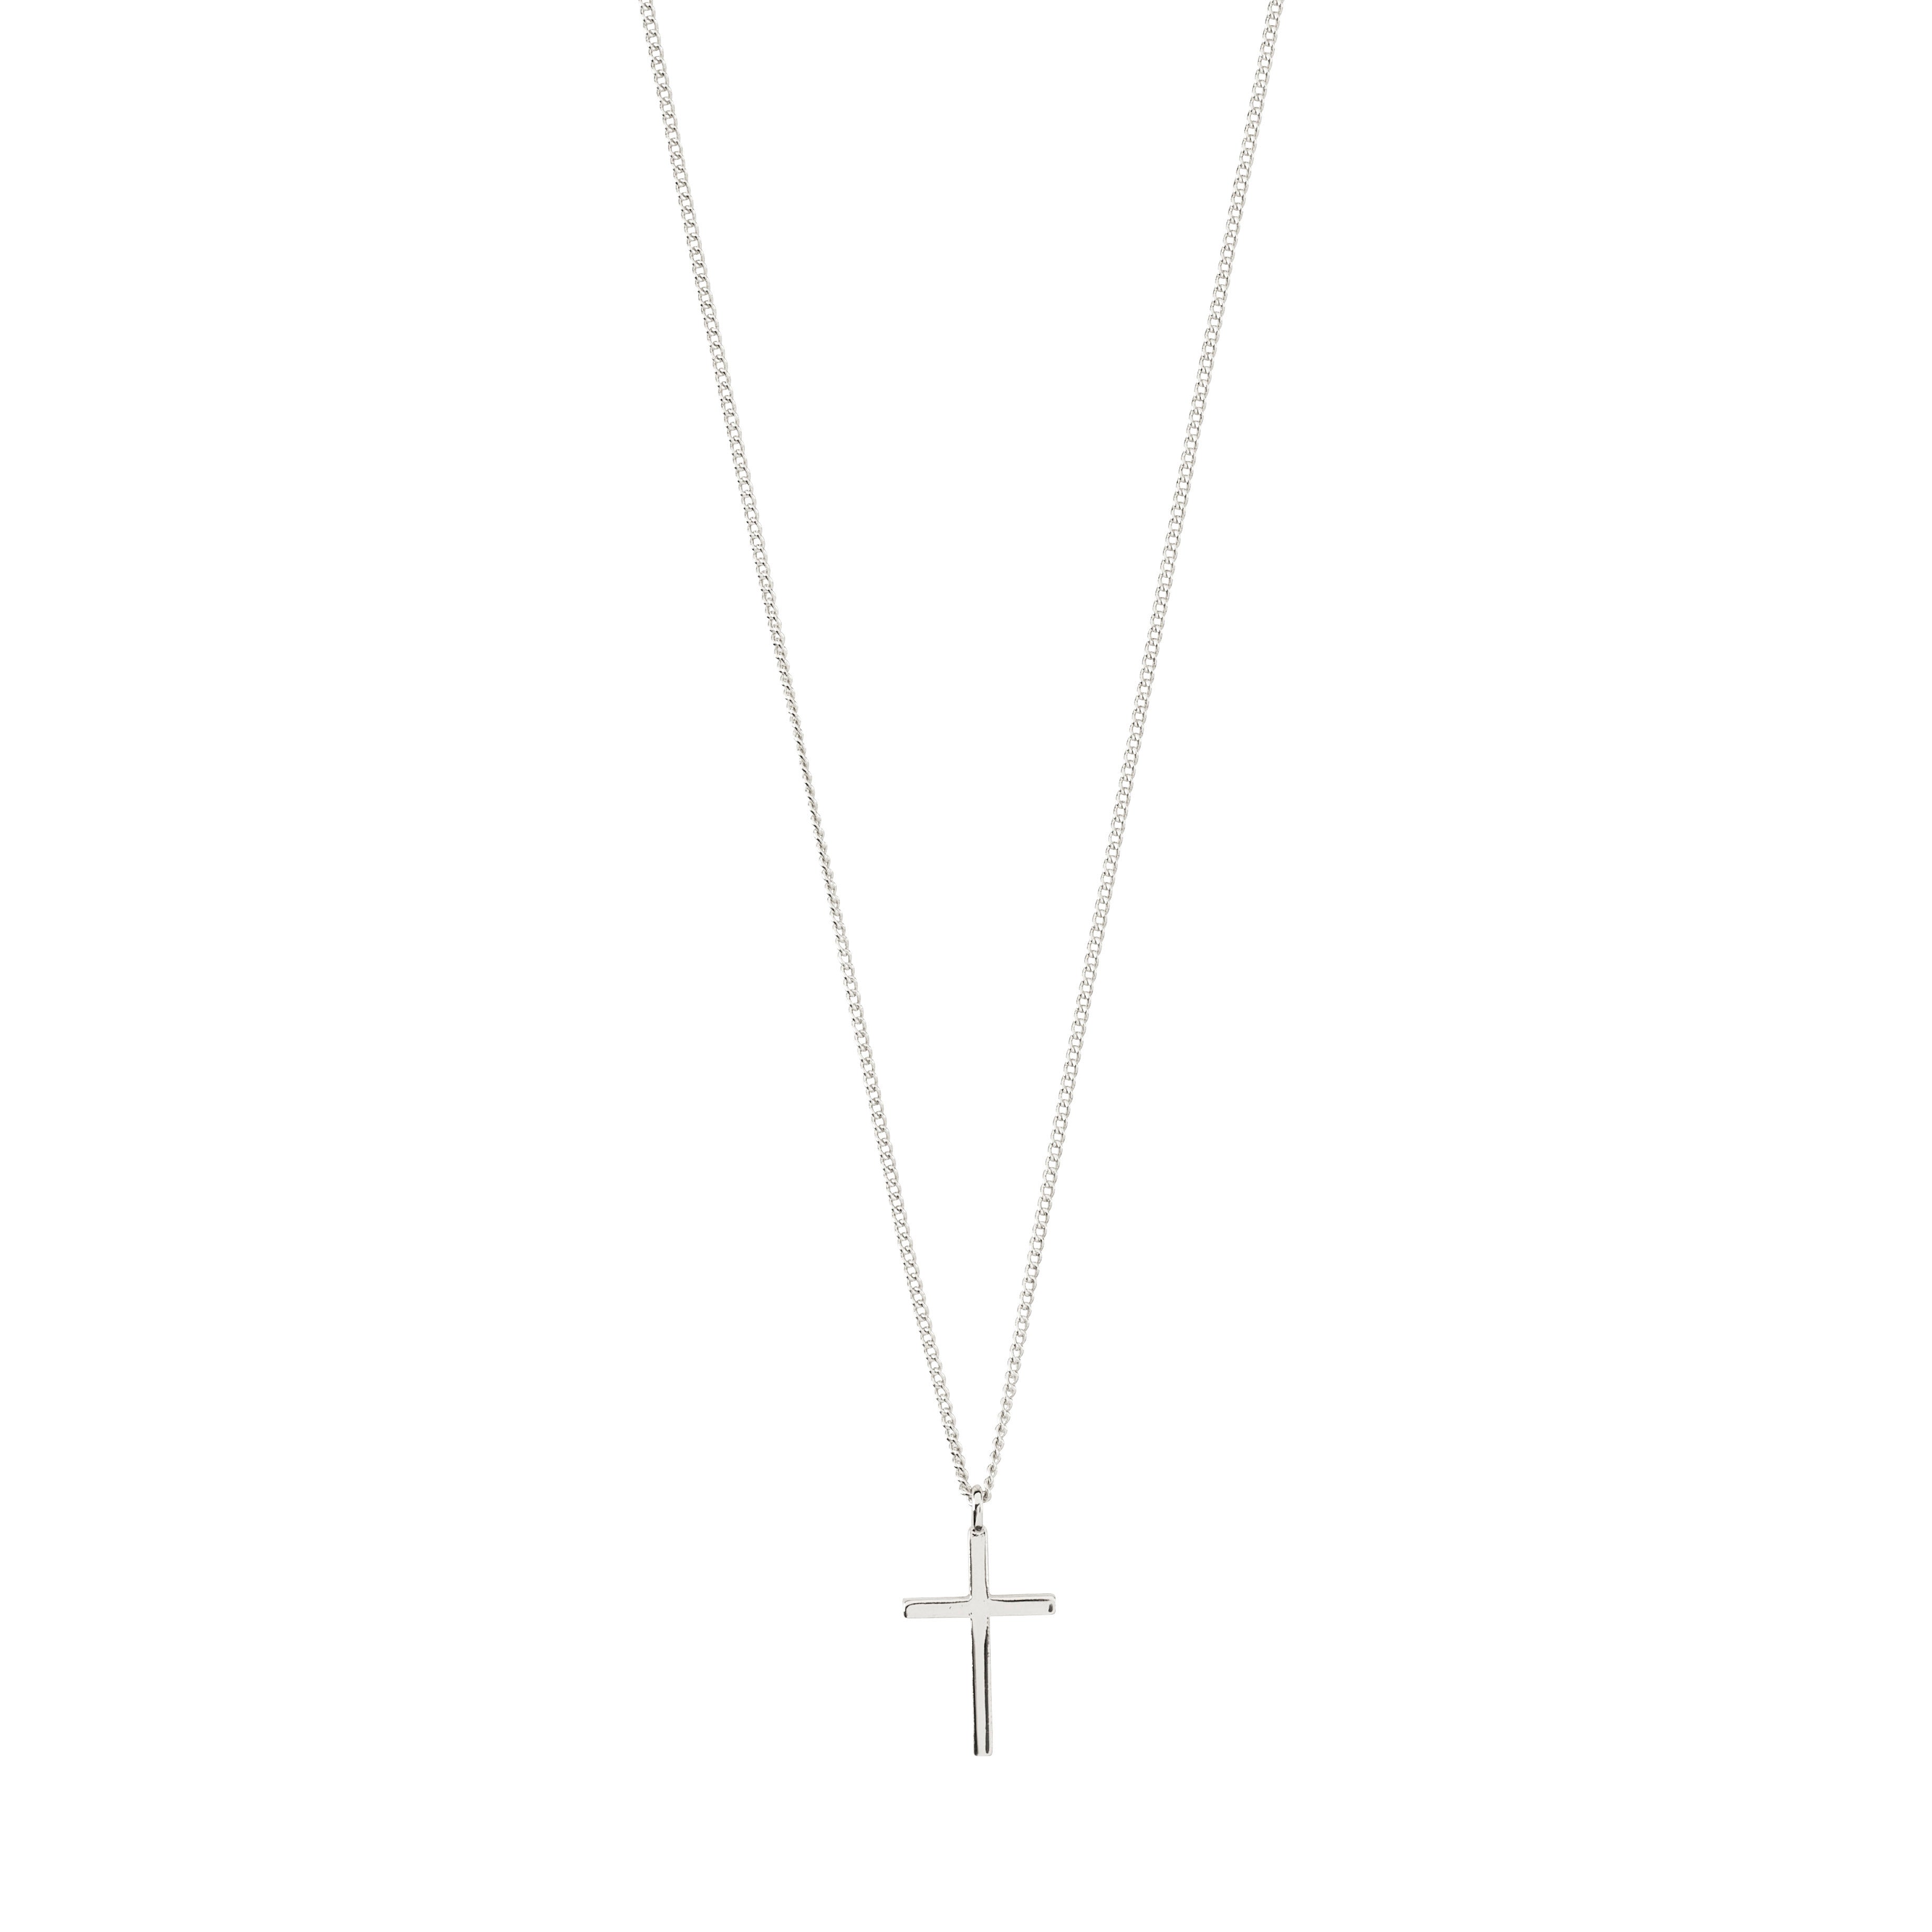 DAISY recycled cross pendant necklace silver-plated